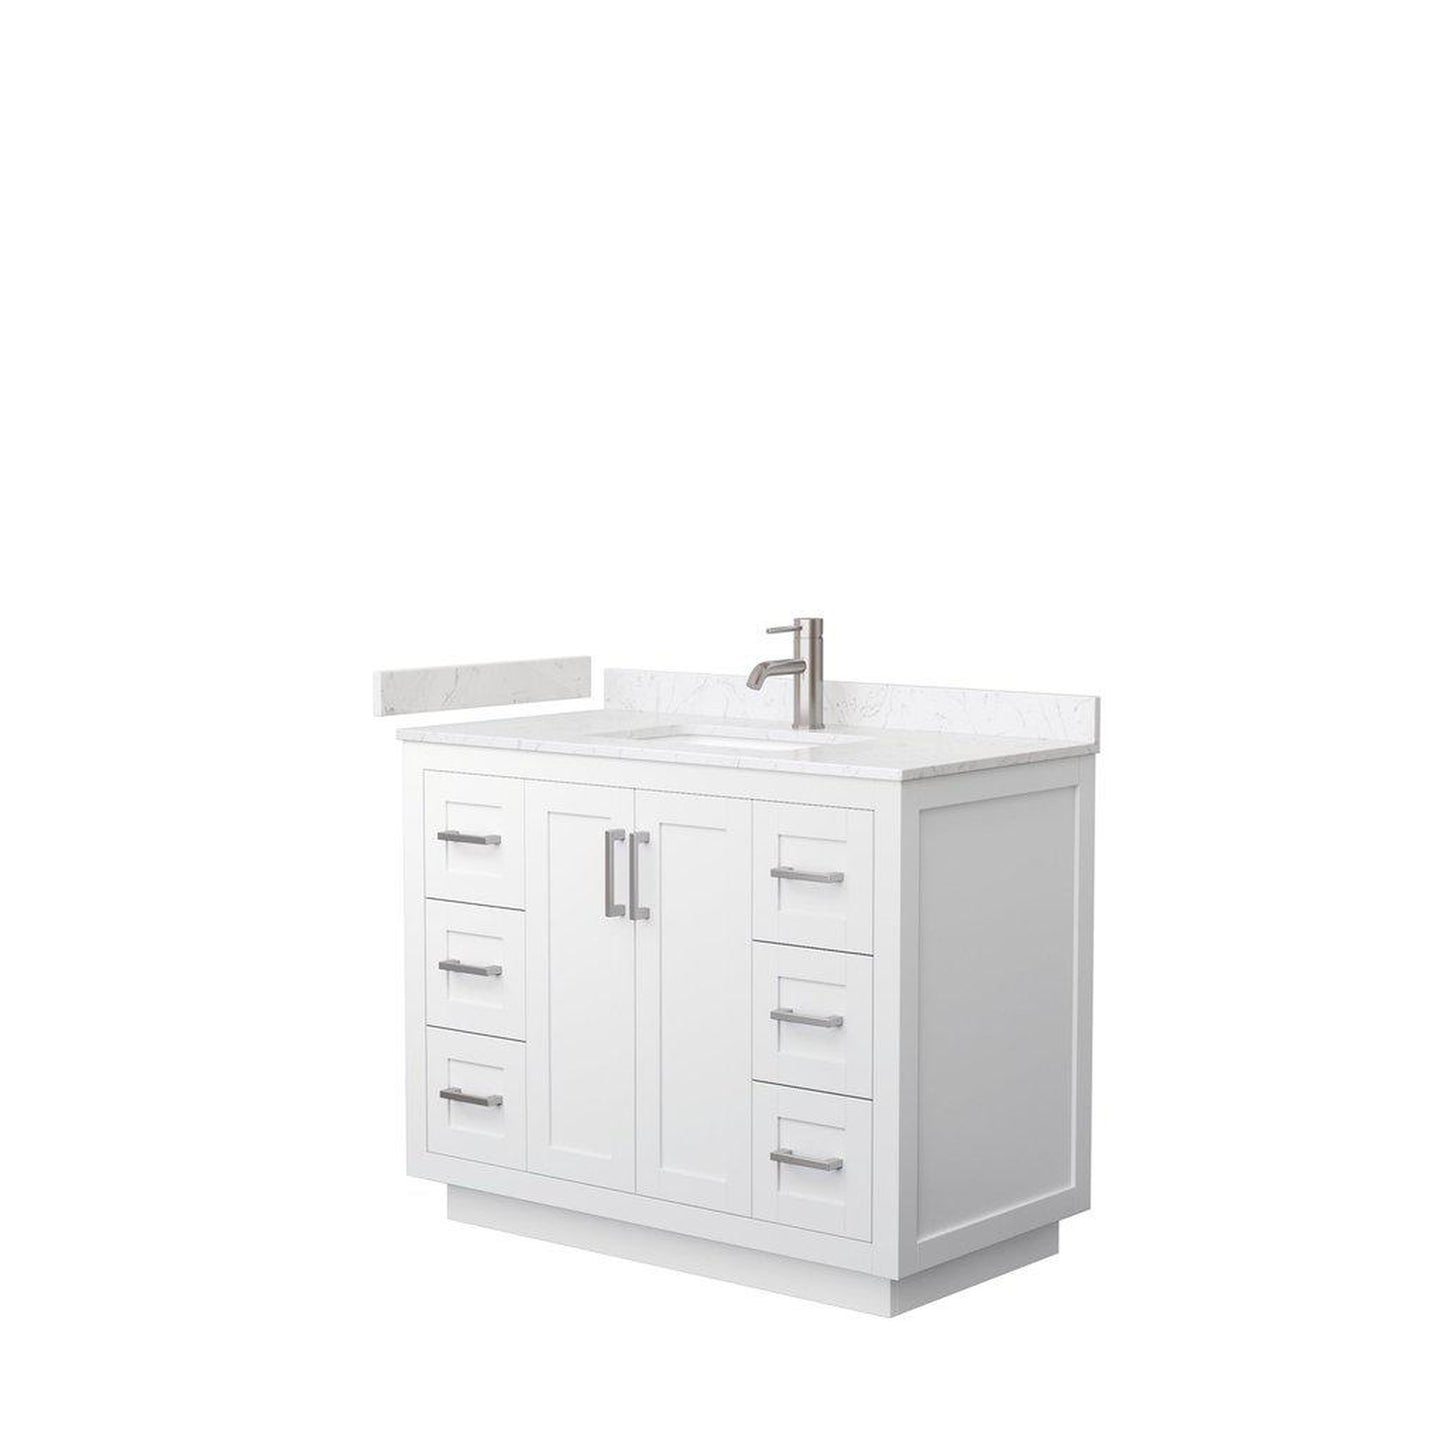 Wyndham Collection Miranda 42" Single Bathroom White Vanity Set With Light-Vein Carrara Cultured Marble Countertop, Undermount Square Sink, And Brushed Nickel Trim